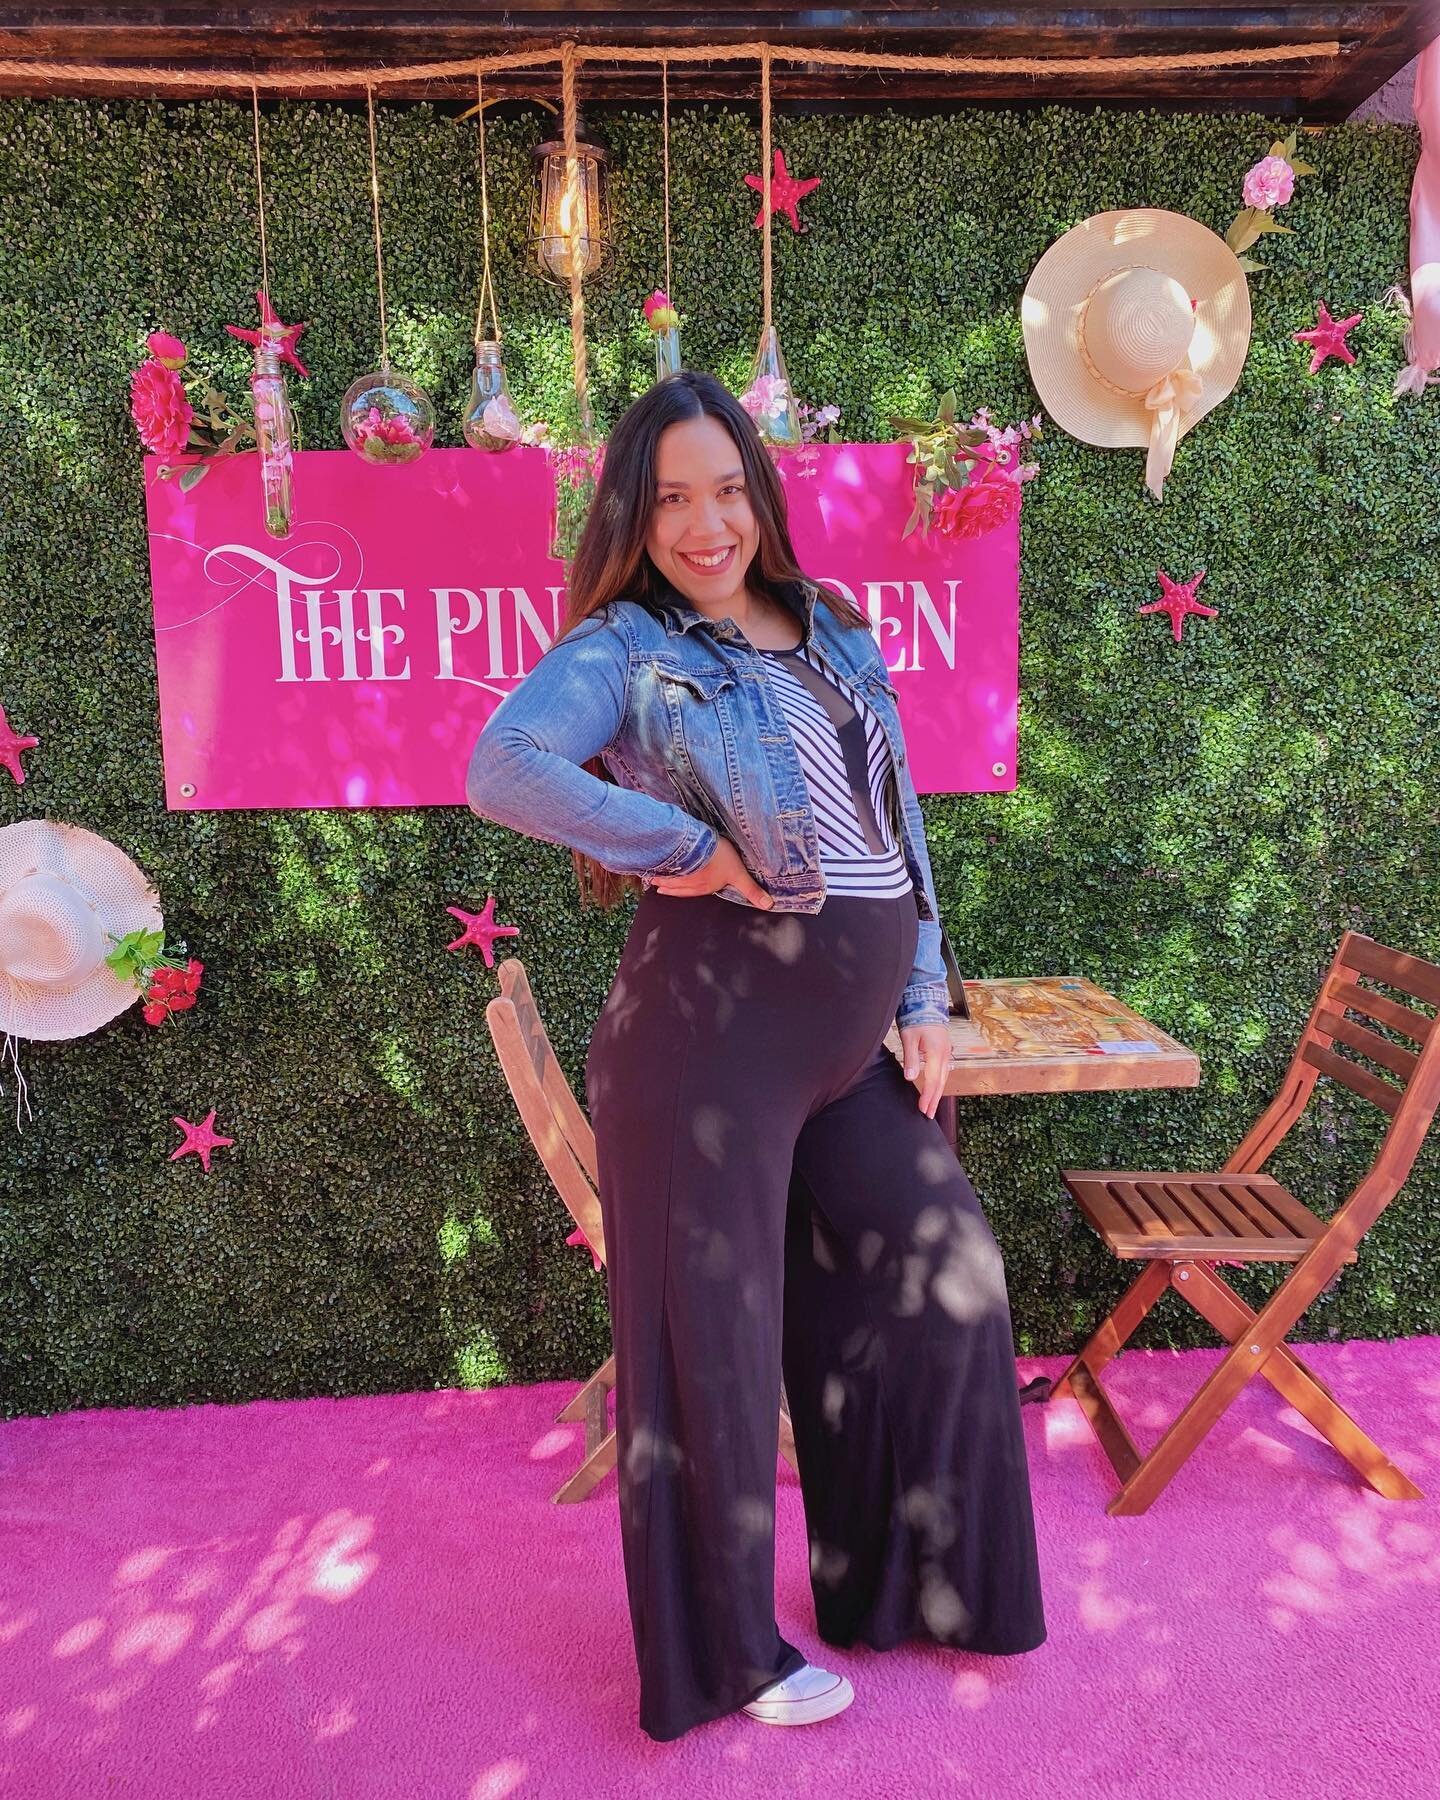 About yesterday💕🌿
Posting this now because yesterday was a long day for this pregnant chick who hasn&rsquo;t done much hanging out lately🤰🏻and I&rsquo;m just now recovering from my night out &ldquo;hangover&rdquo;.😩😂
#thepinkgarden 
.
.
.
.
.
#